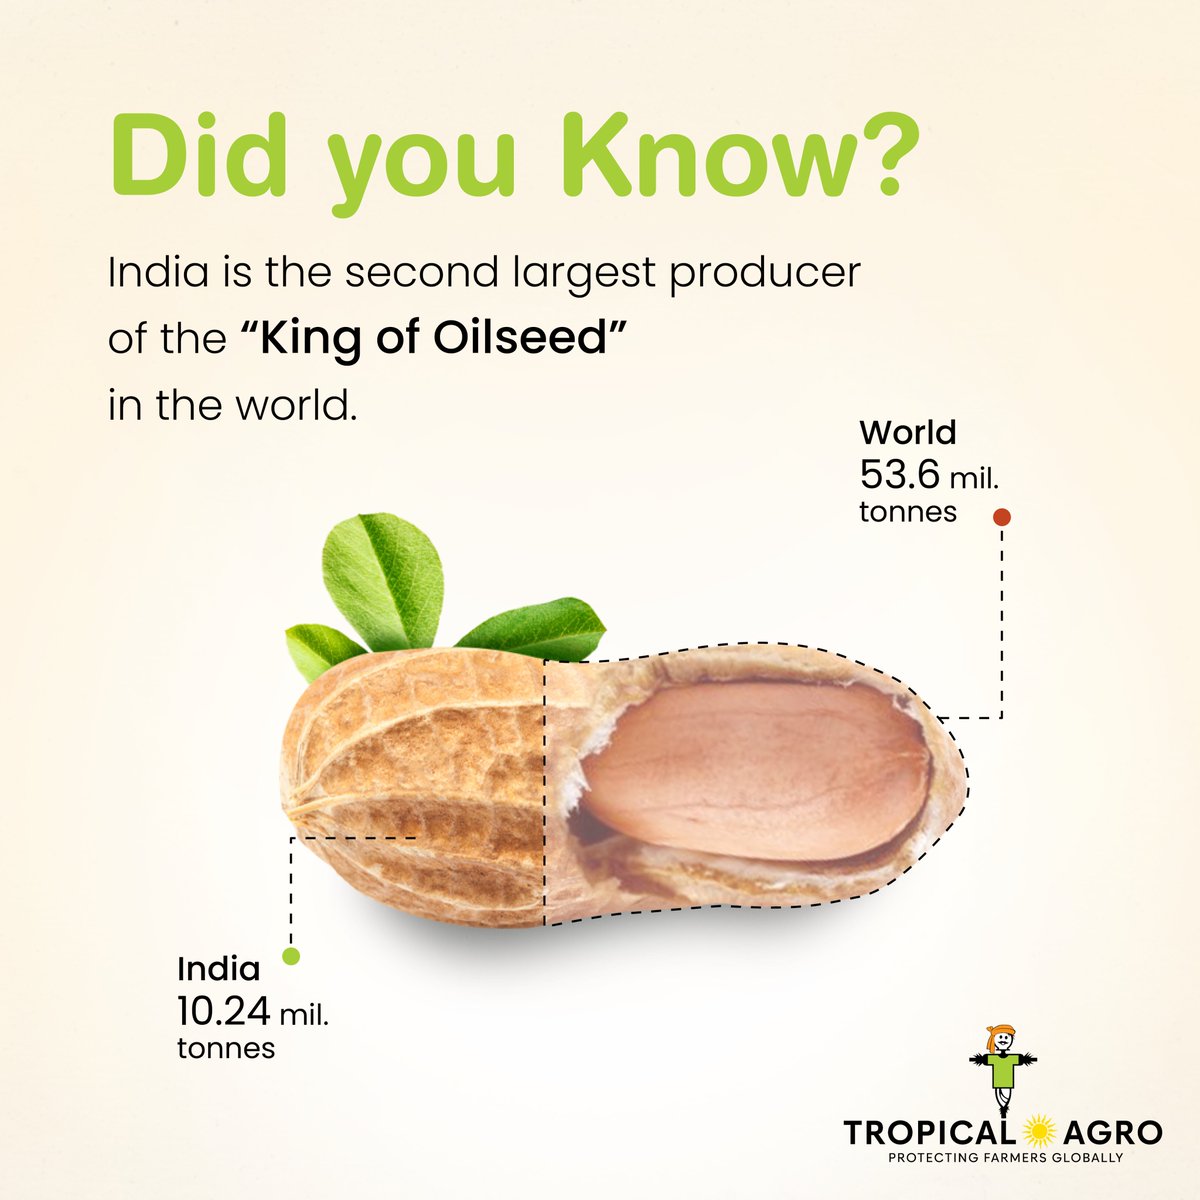 #DidYouKnow Facts about Groundnut - The King of Oilseed

#kingofoilseeds #WorldProduction #India #TropicalAgro #Facts #Groundnut